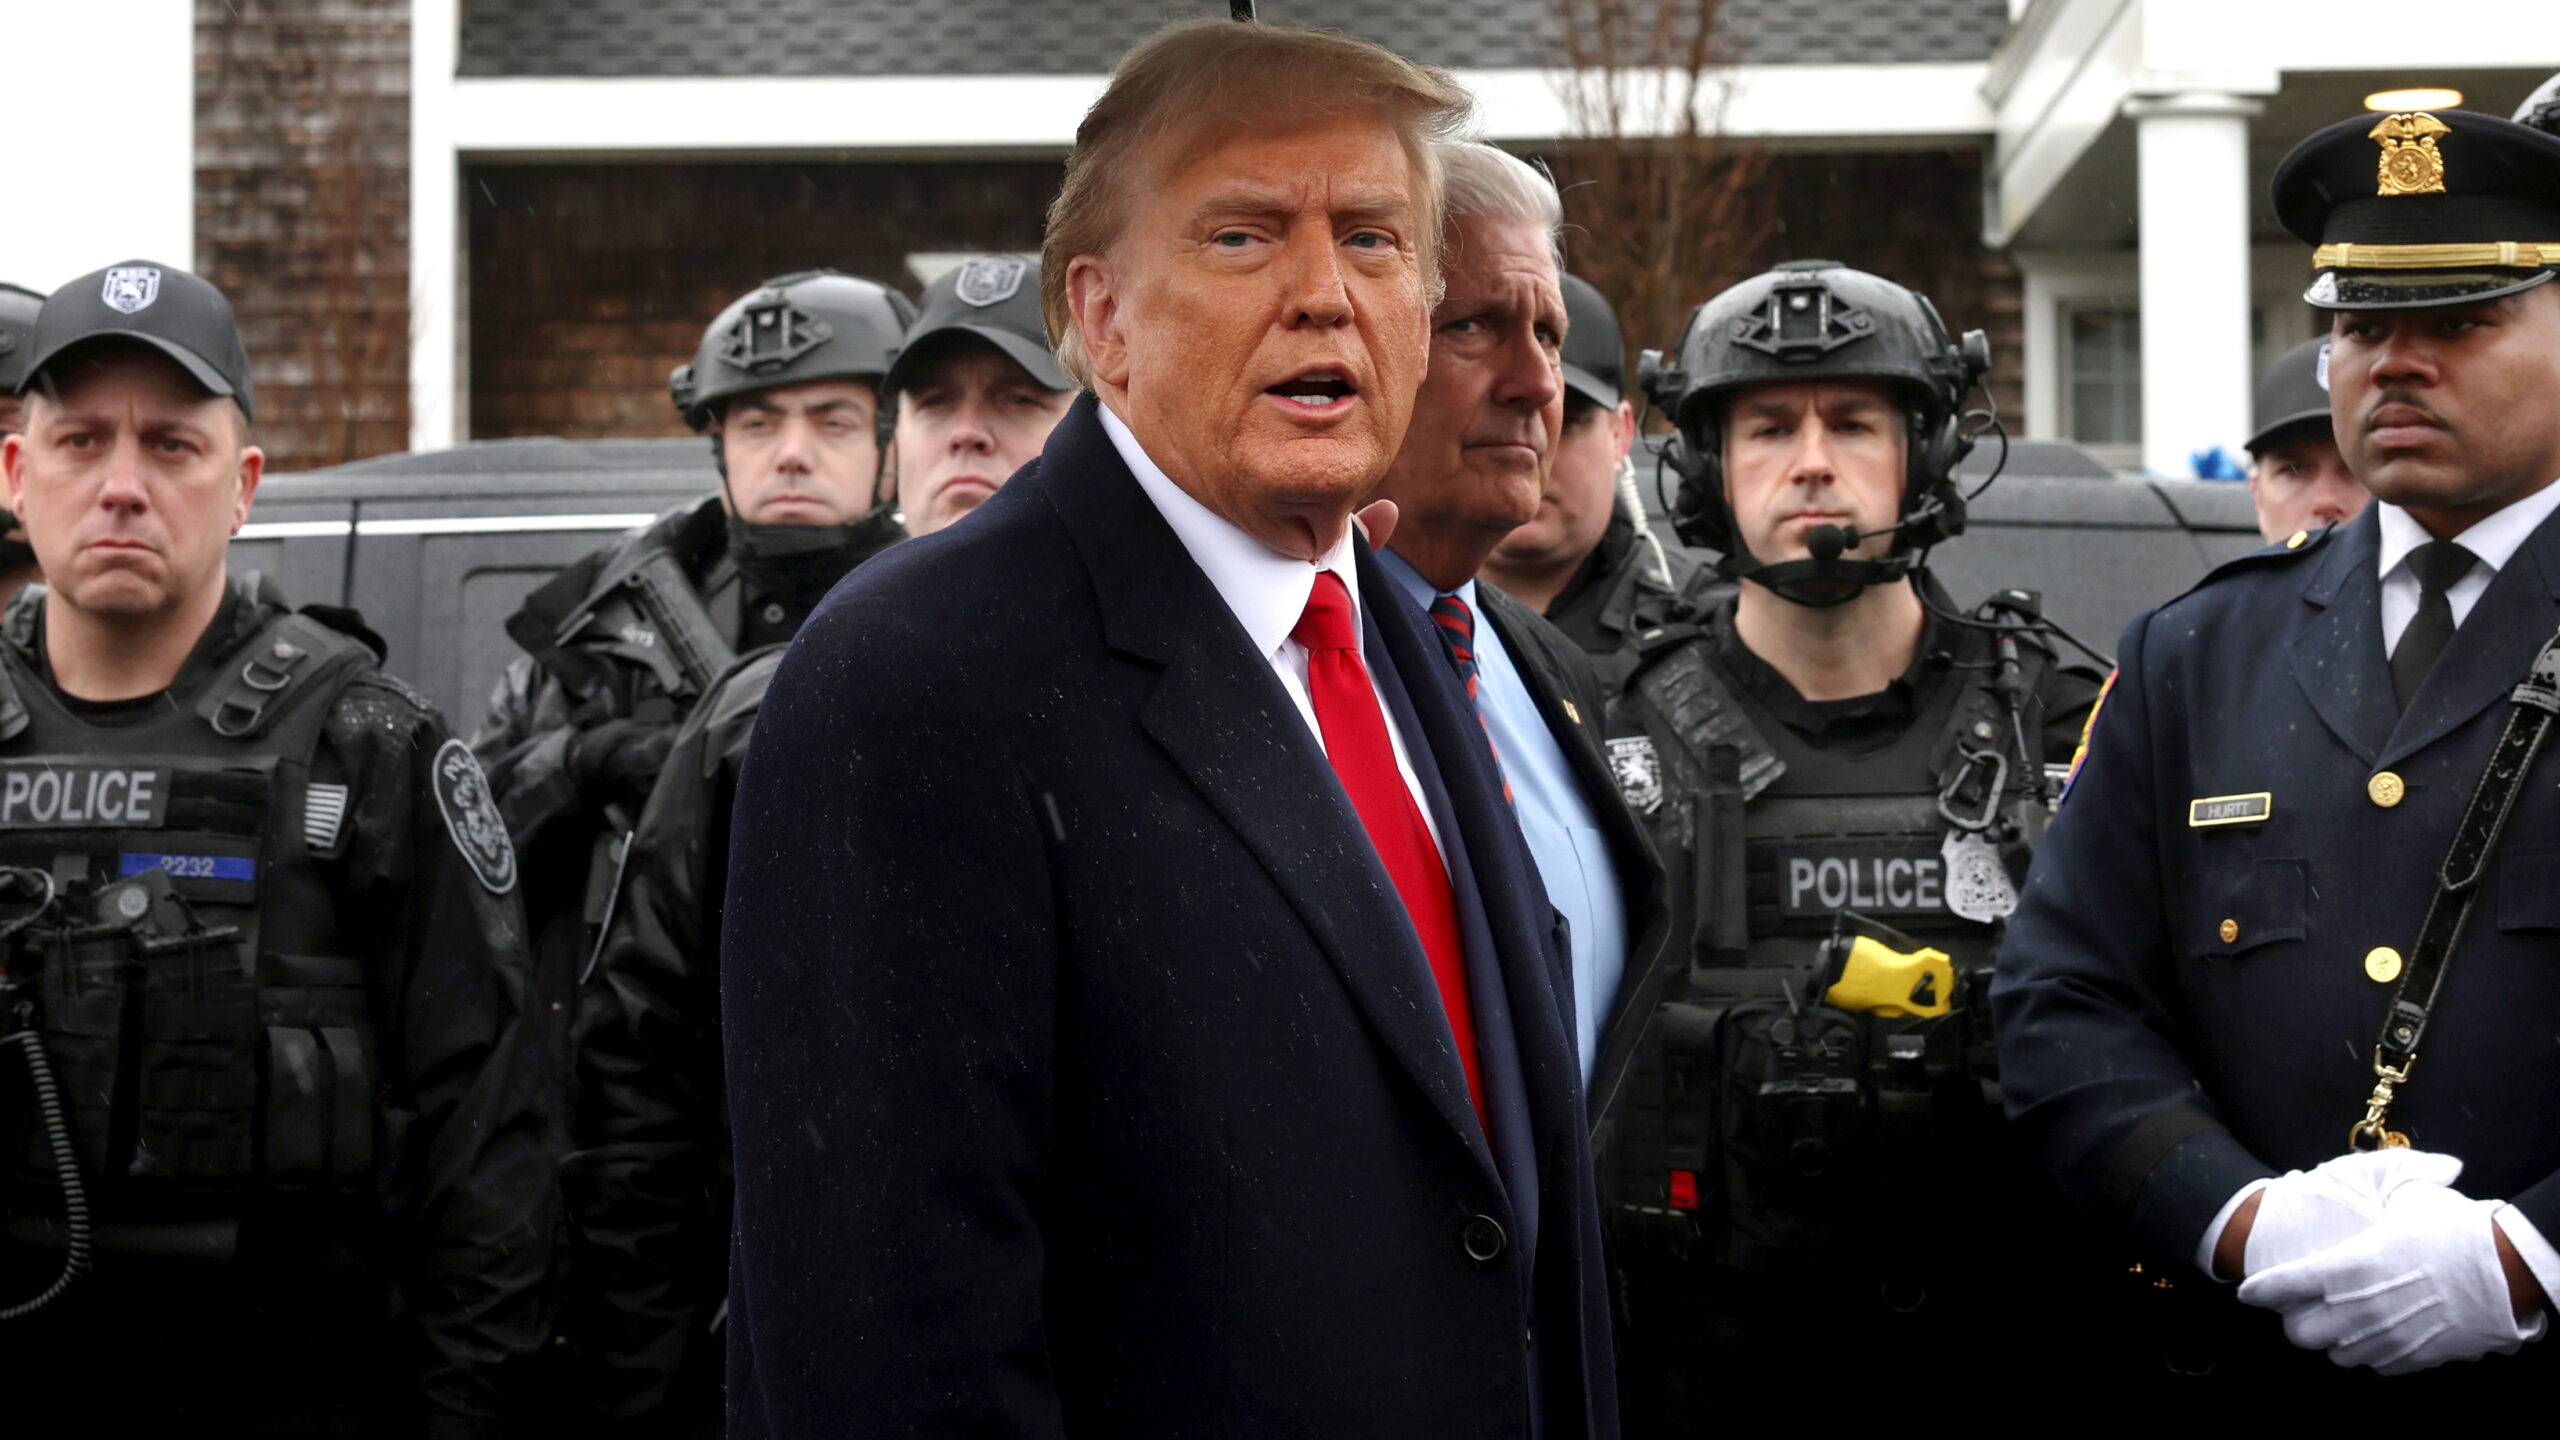 Trump criticizes Biden for lacking the strength to support law enforcement